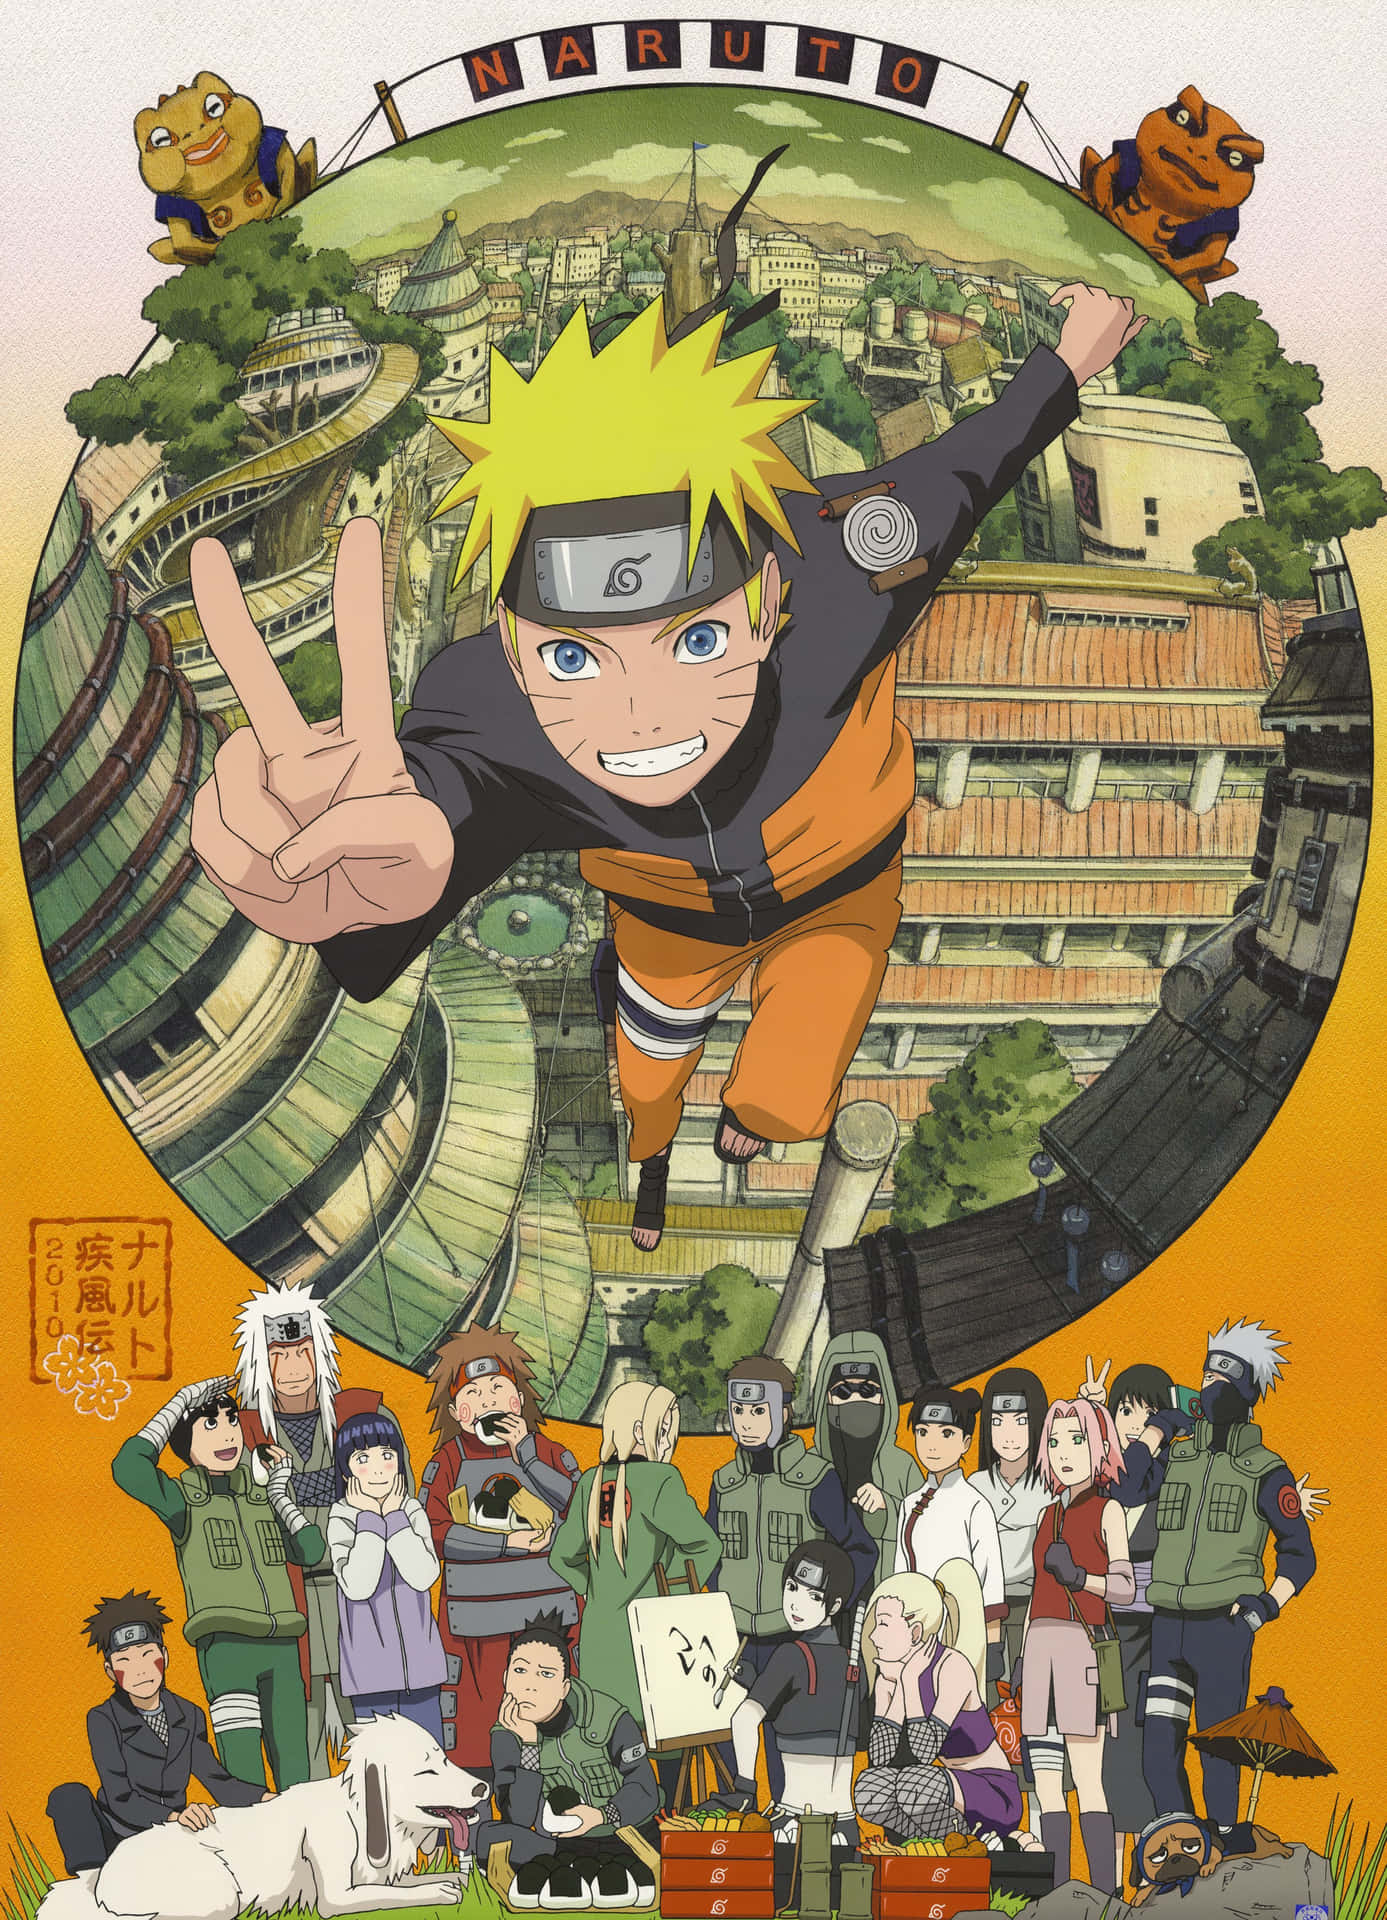 Naruto and his friends together in an epic adventure Wallpaper